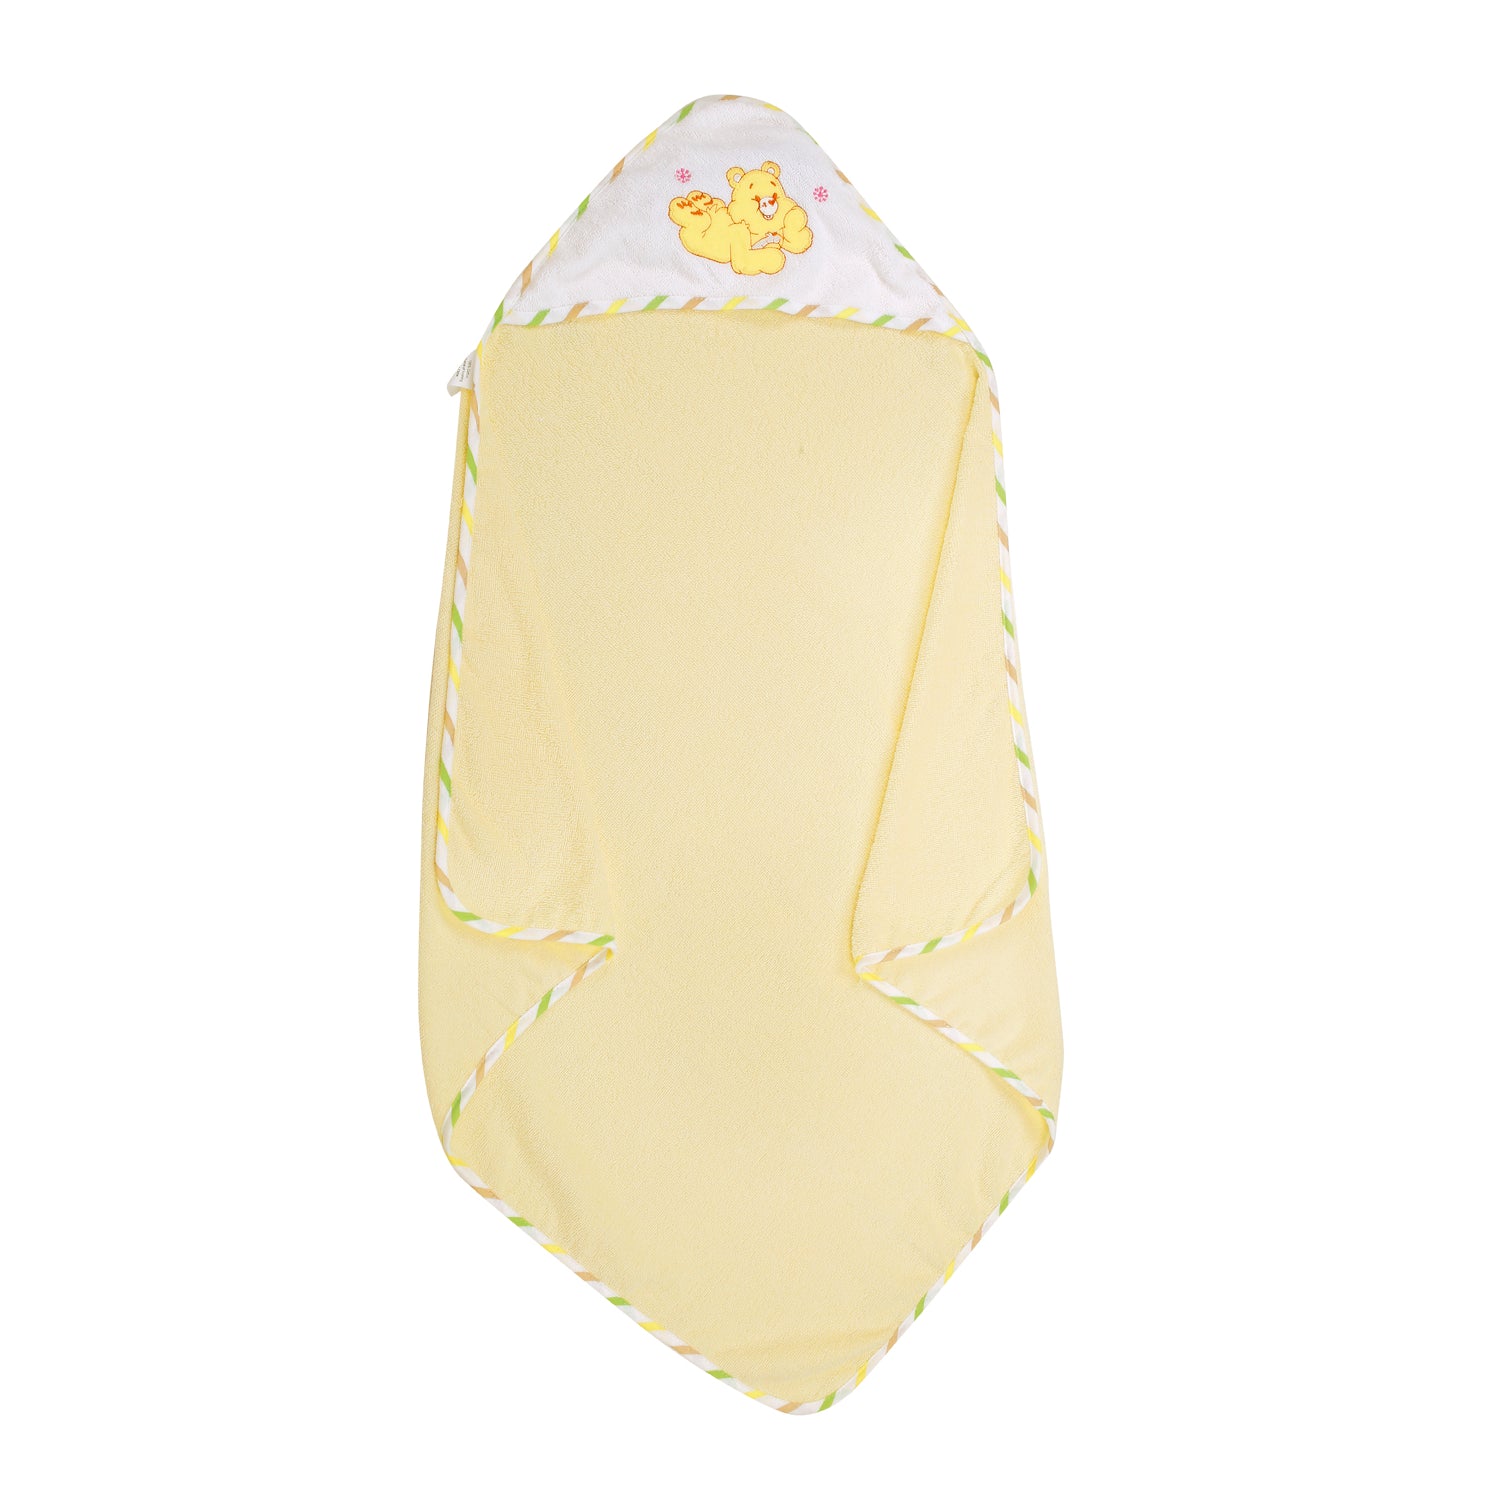 Lion Yellow And White Hooded Towel - Baby Moo